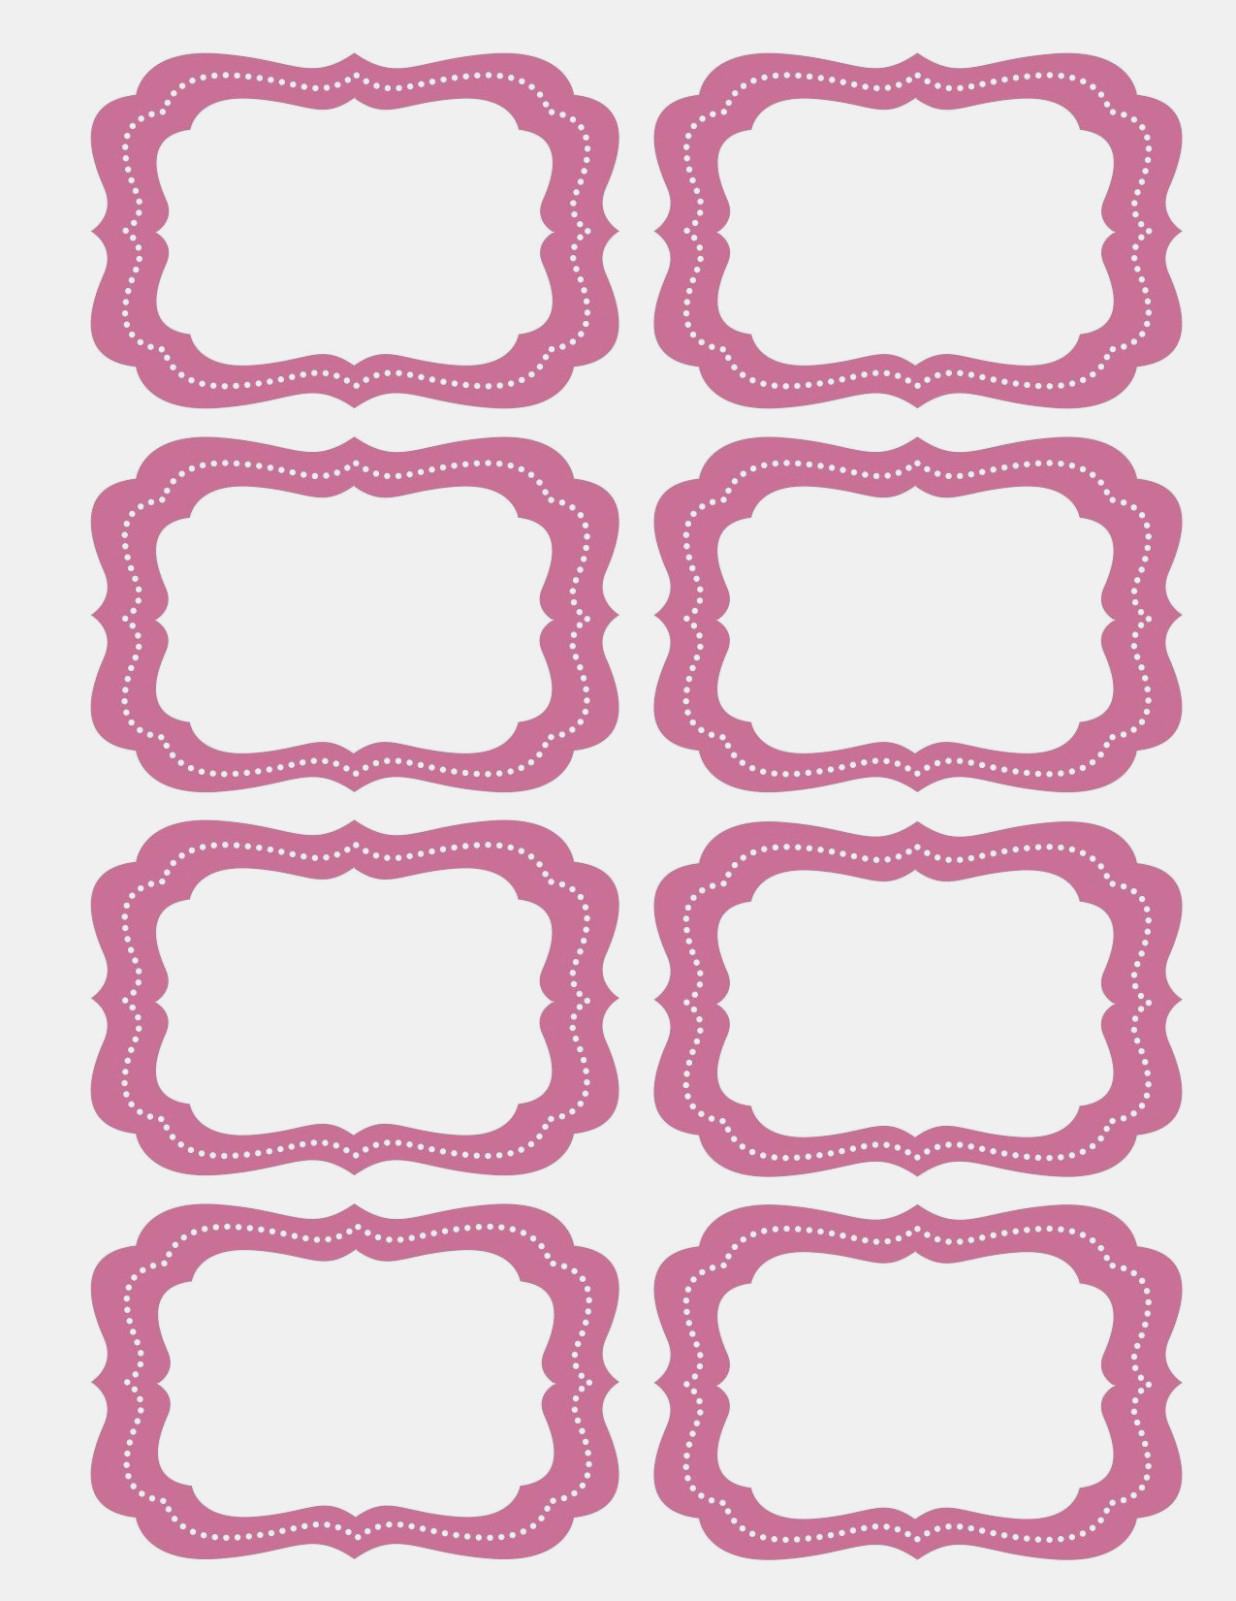 Free Printable Bag Label Templates | Candy Labels Blank Image - Free Printable Candy Buffet Labels Templates